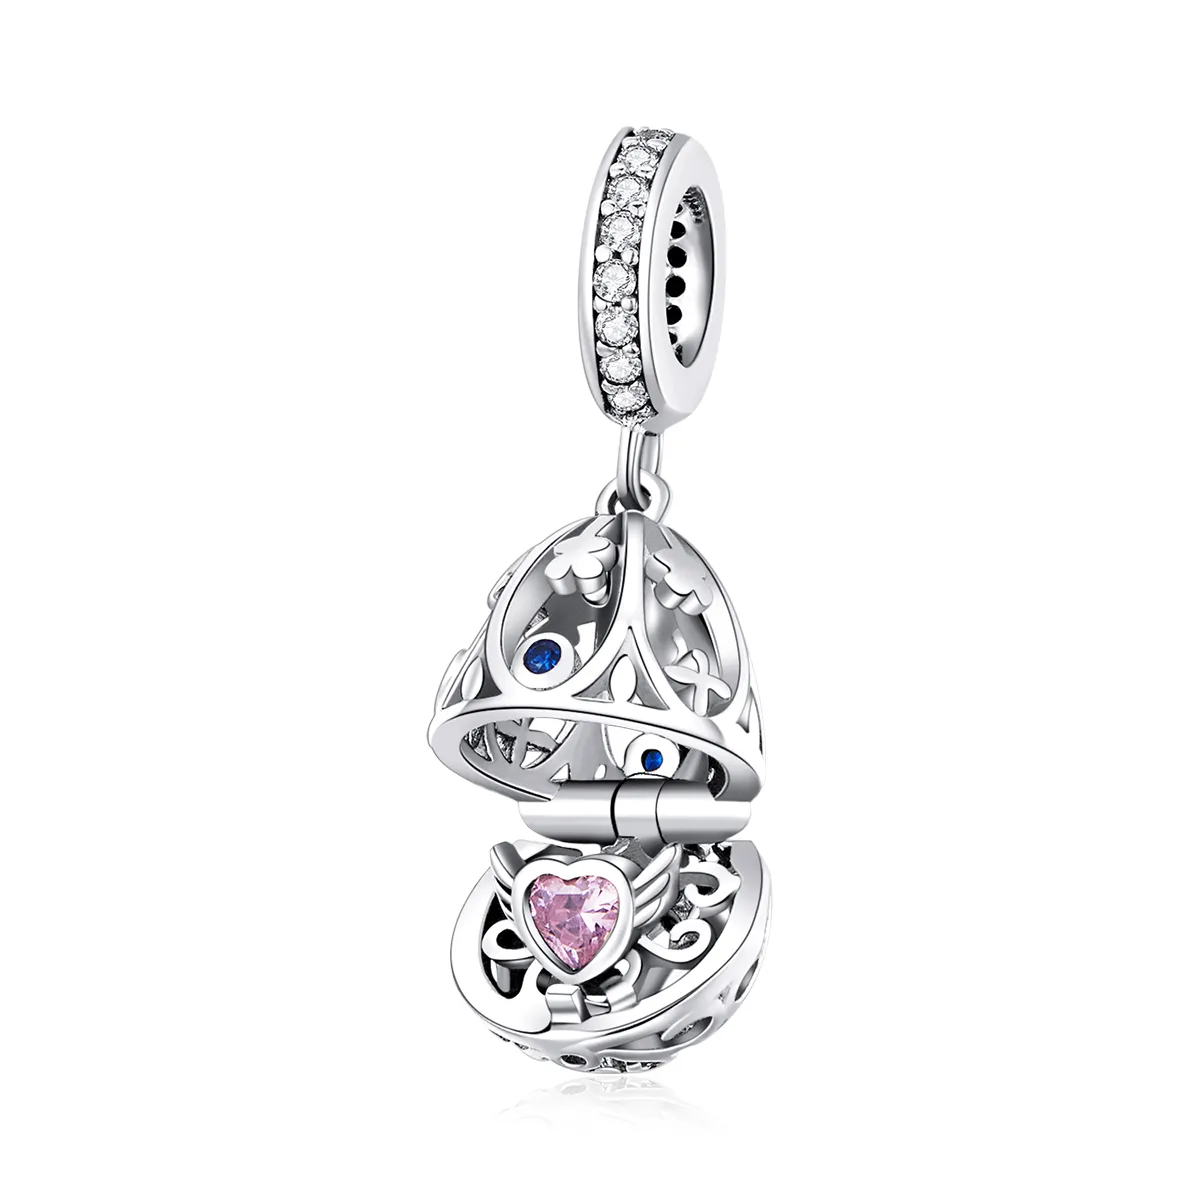 Pandora Style Silver Easter Egg With Treasure Dangle - SCC1465